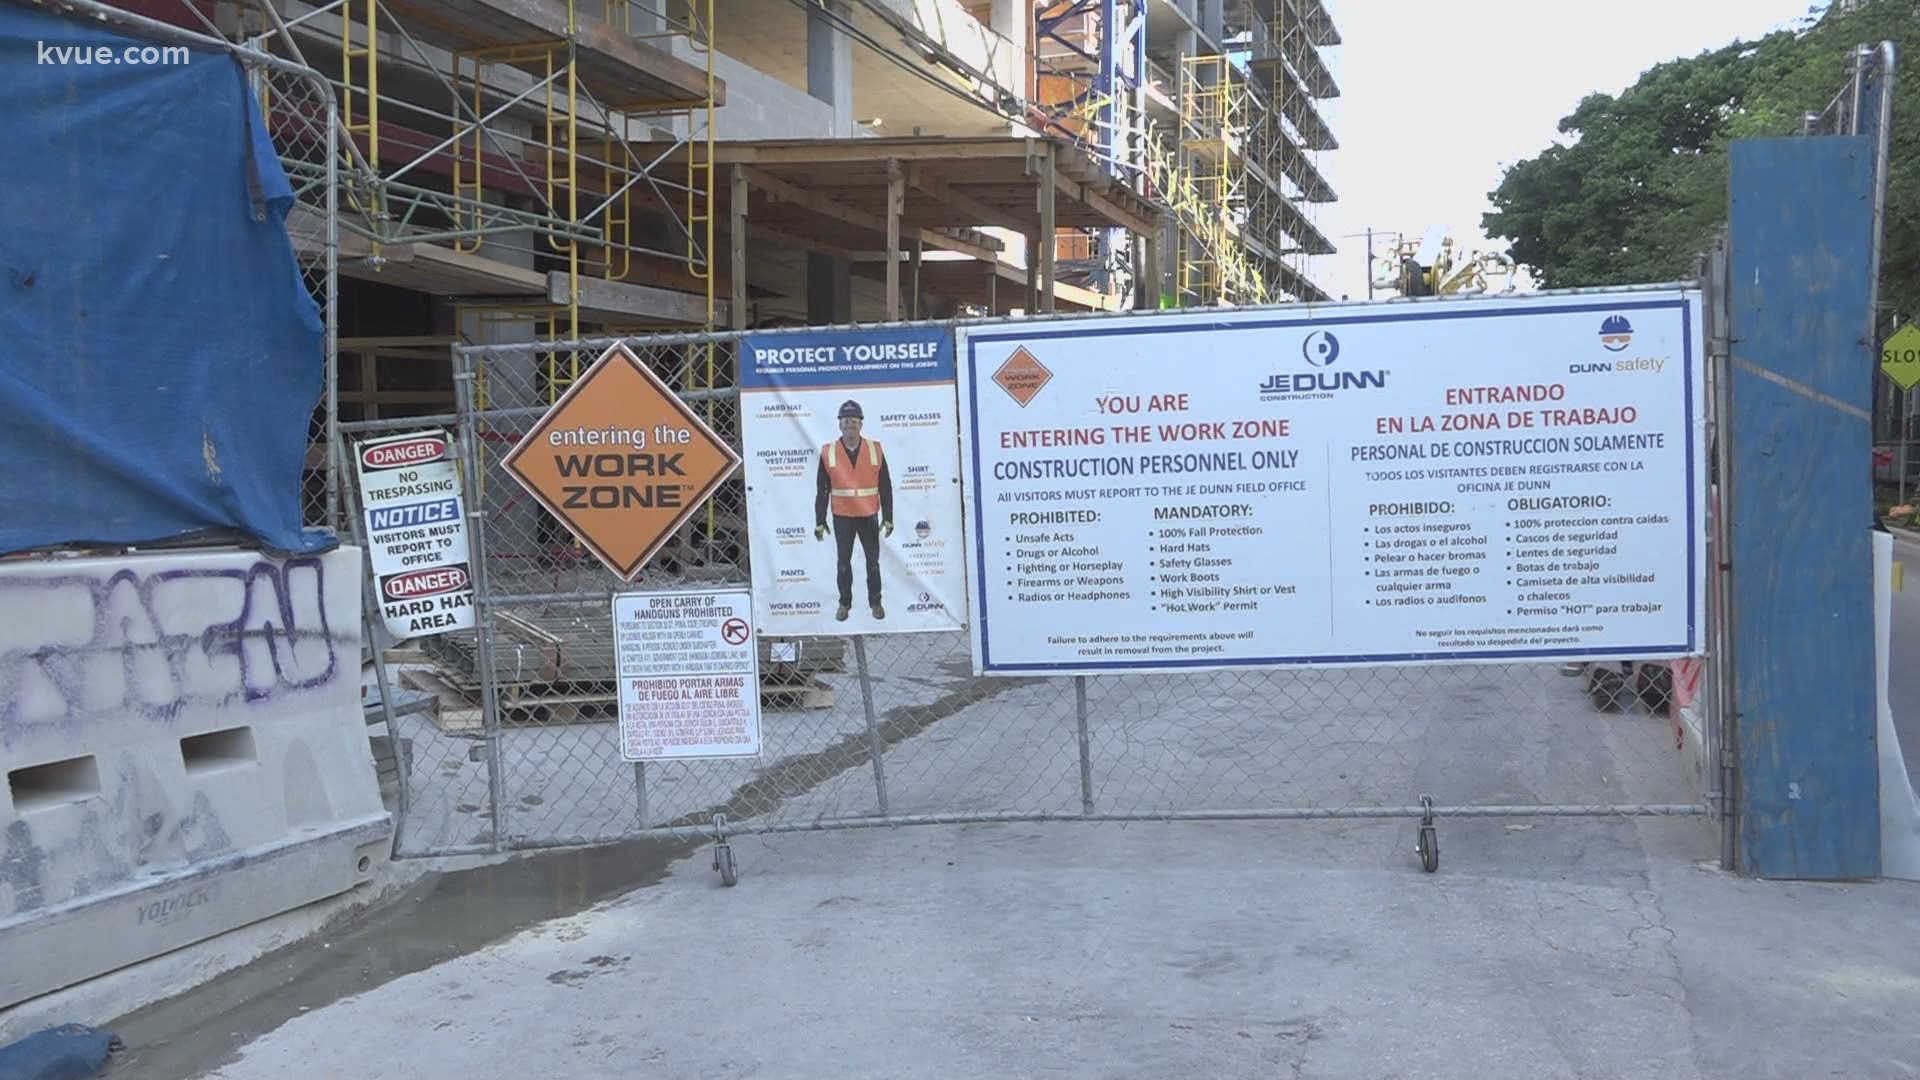 Editor's note: The video attached to this story refers to the JE Dunn Construction company as JE Construction. The company is JE Dunn Construction.